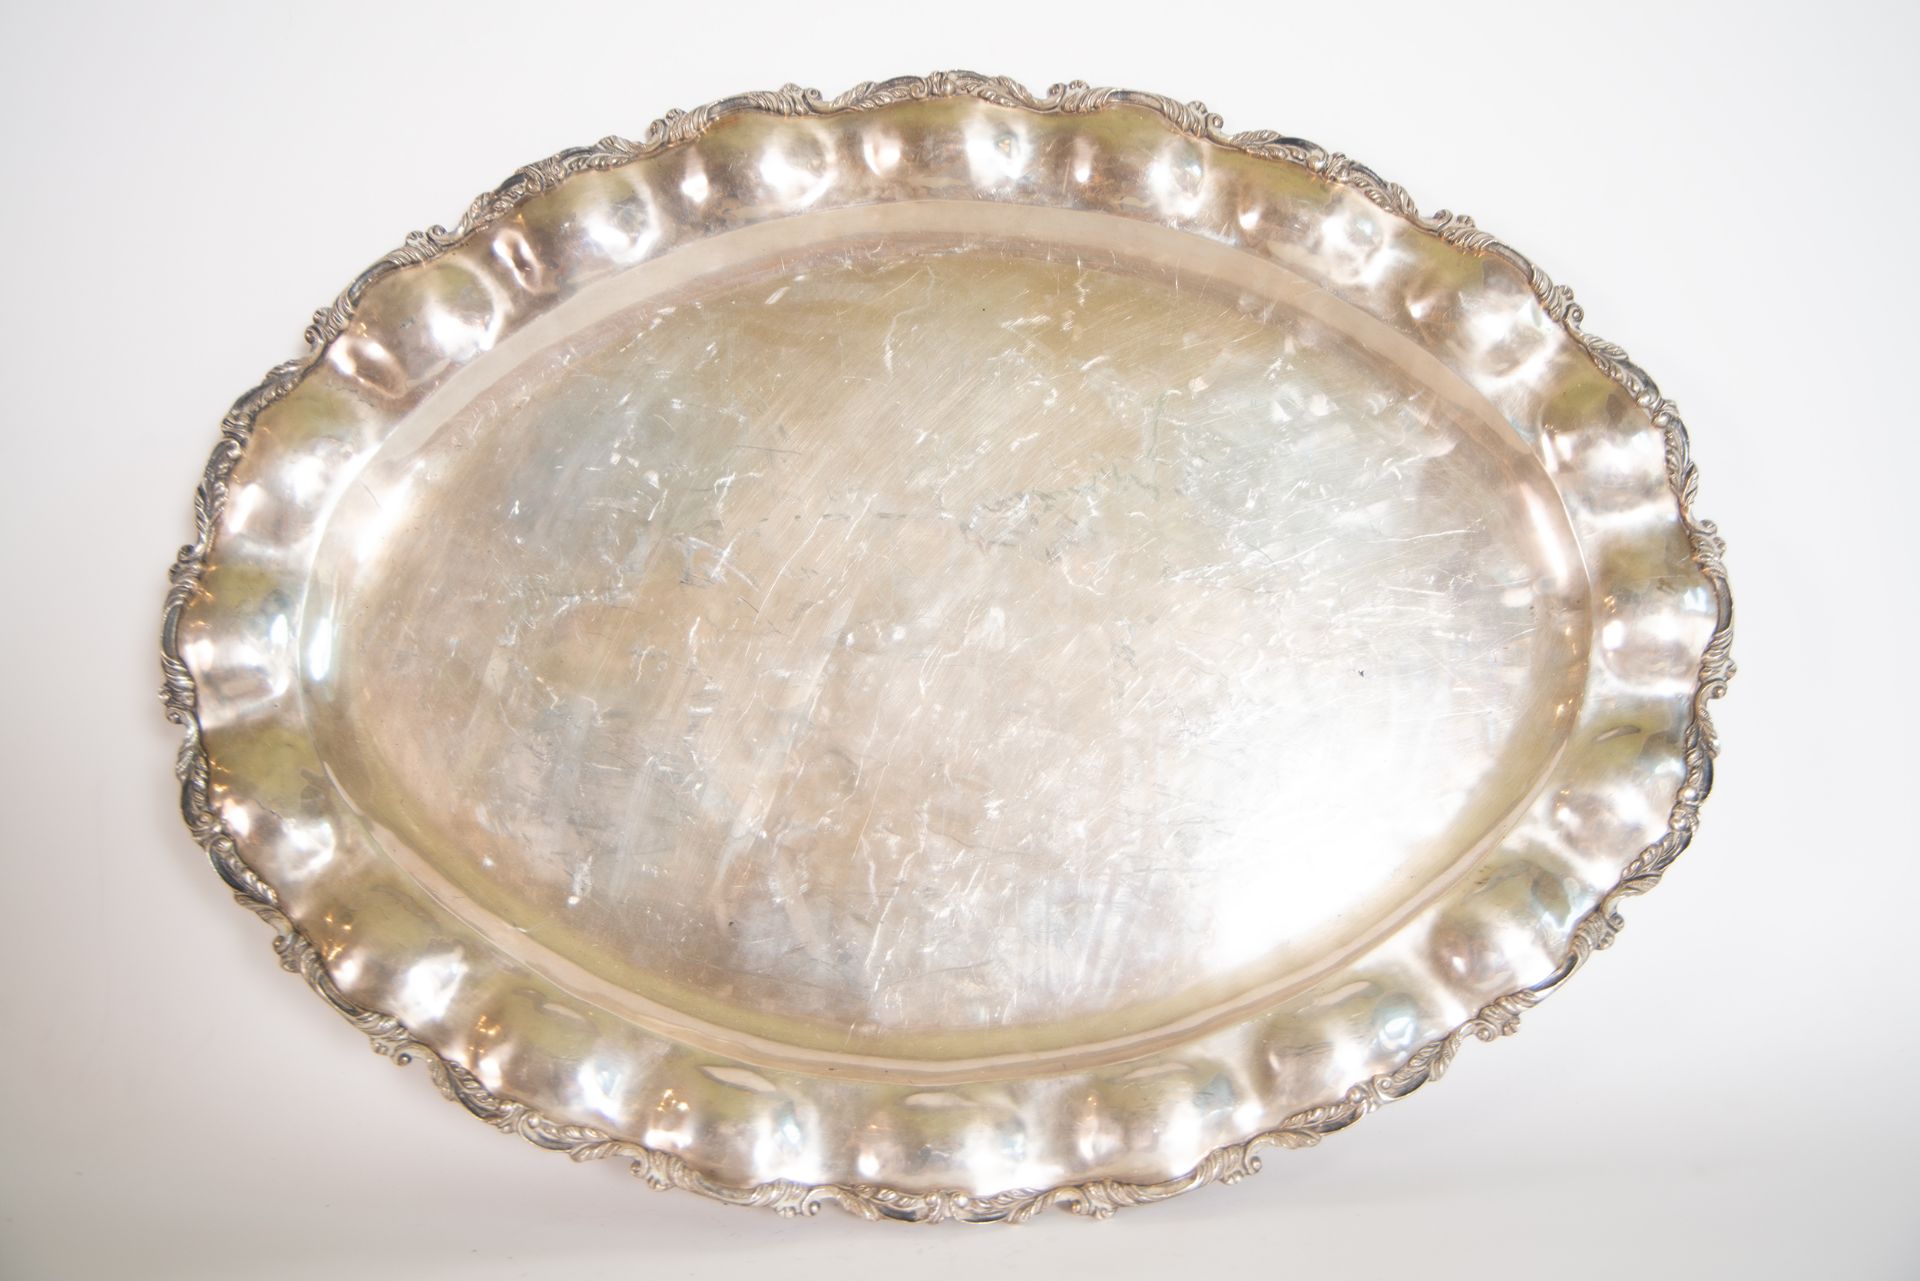 Large Sterling Silver Desserts Tray, 19th century French school